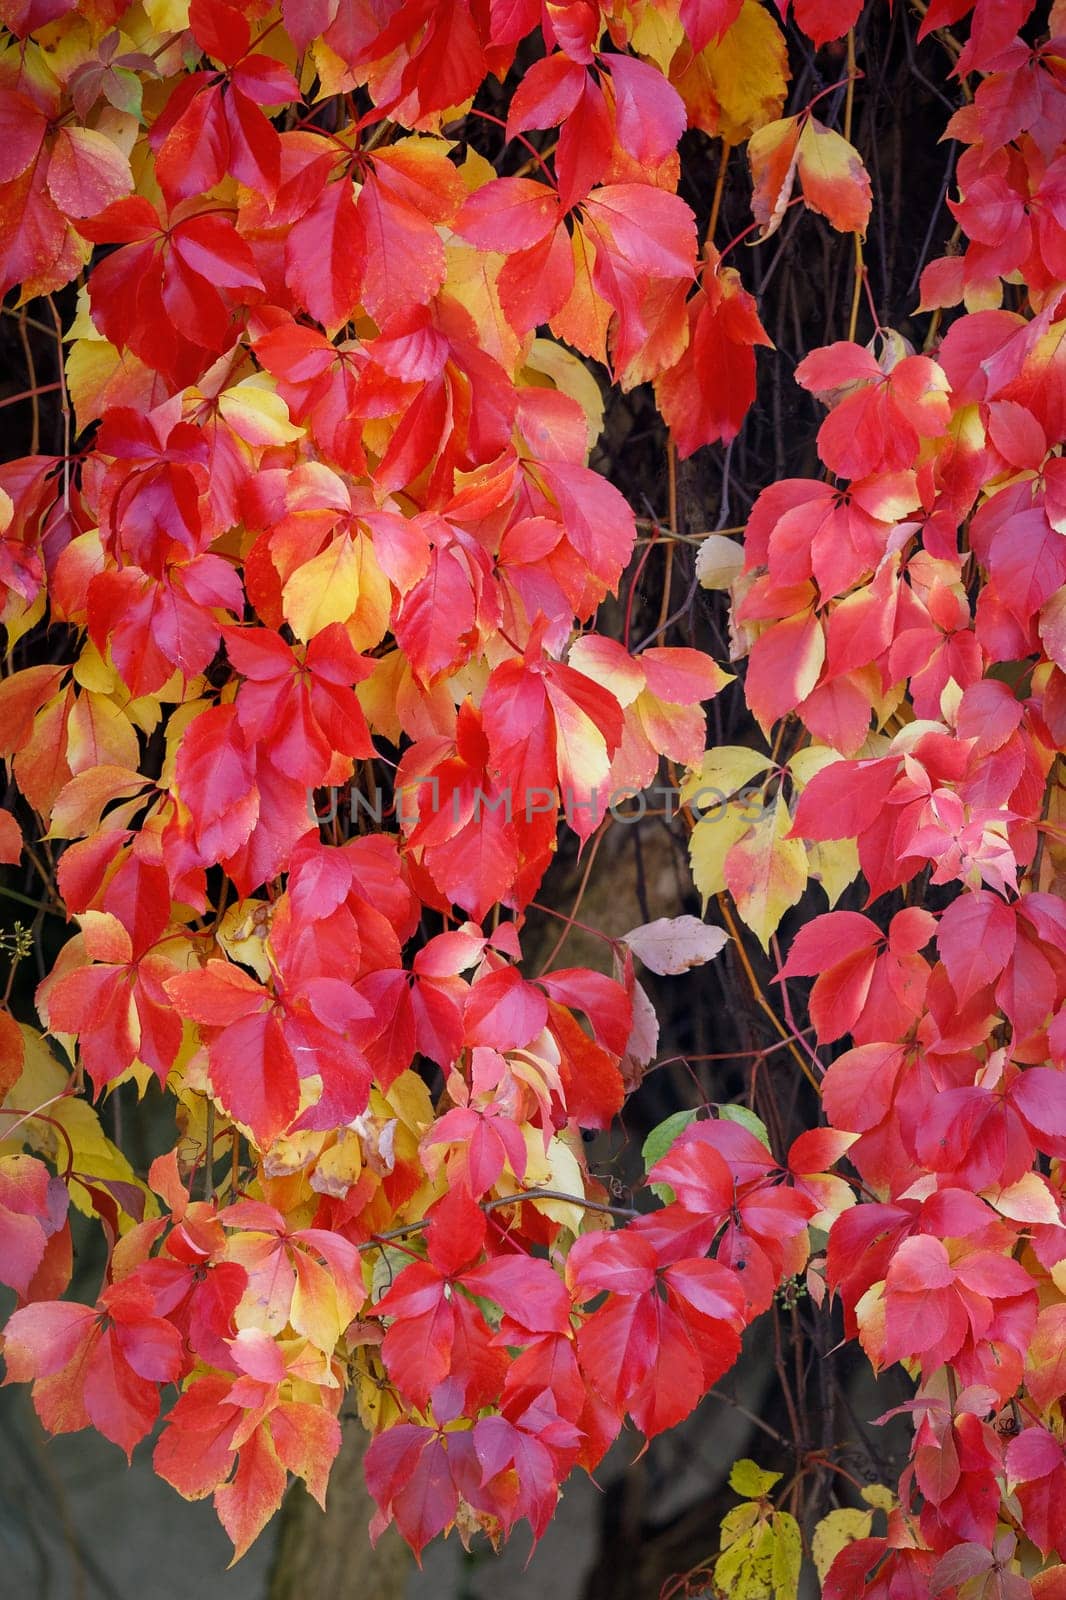 The wall covered with mix of red and yellow Boston ivy leaves or Parthenocissus tricuspidata in autumn.